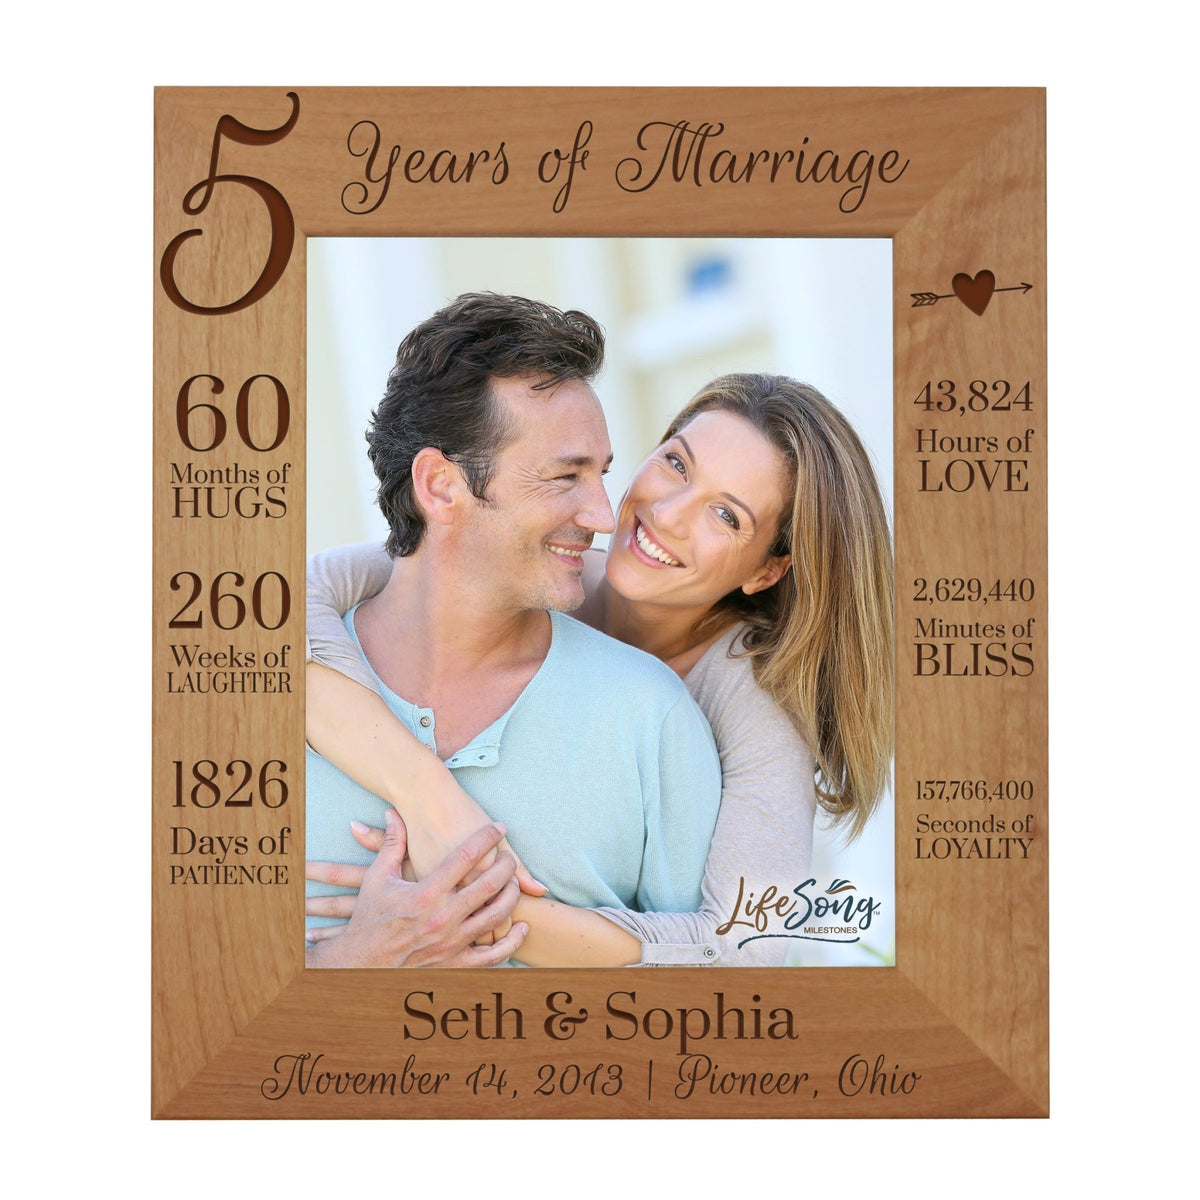 Personalized Couples 5th Wedding Anniversary Photo Frame Home Decor Gift Ideas